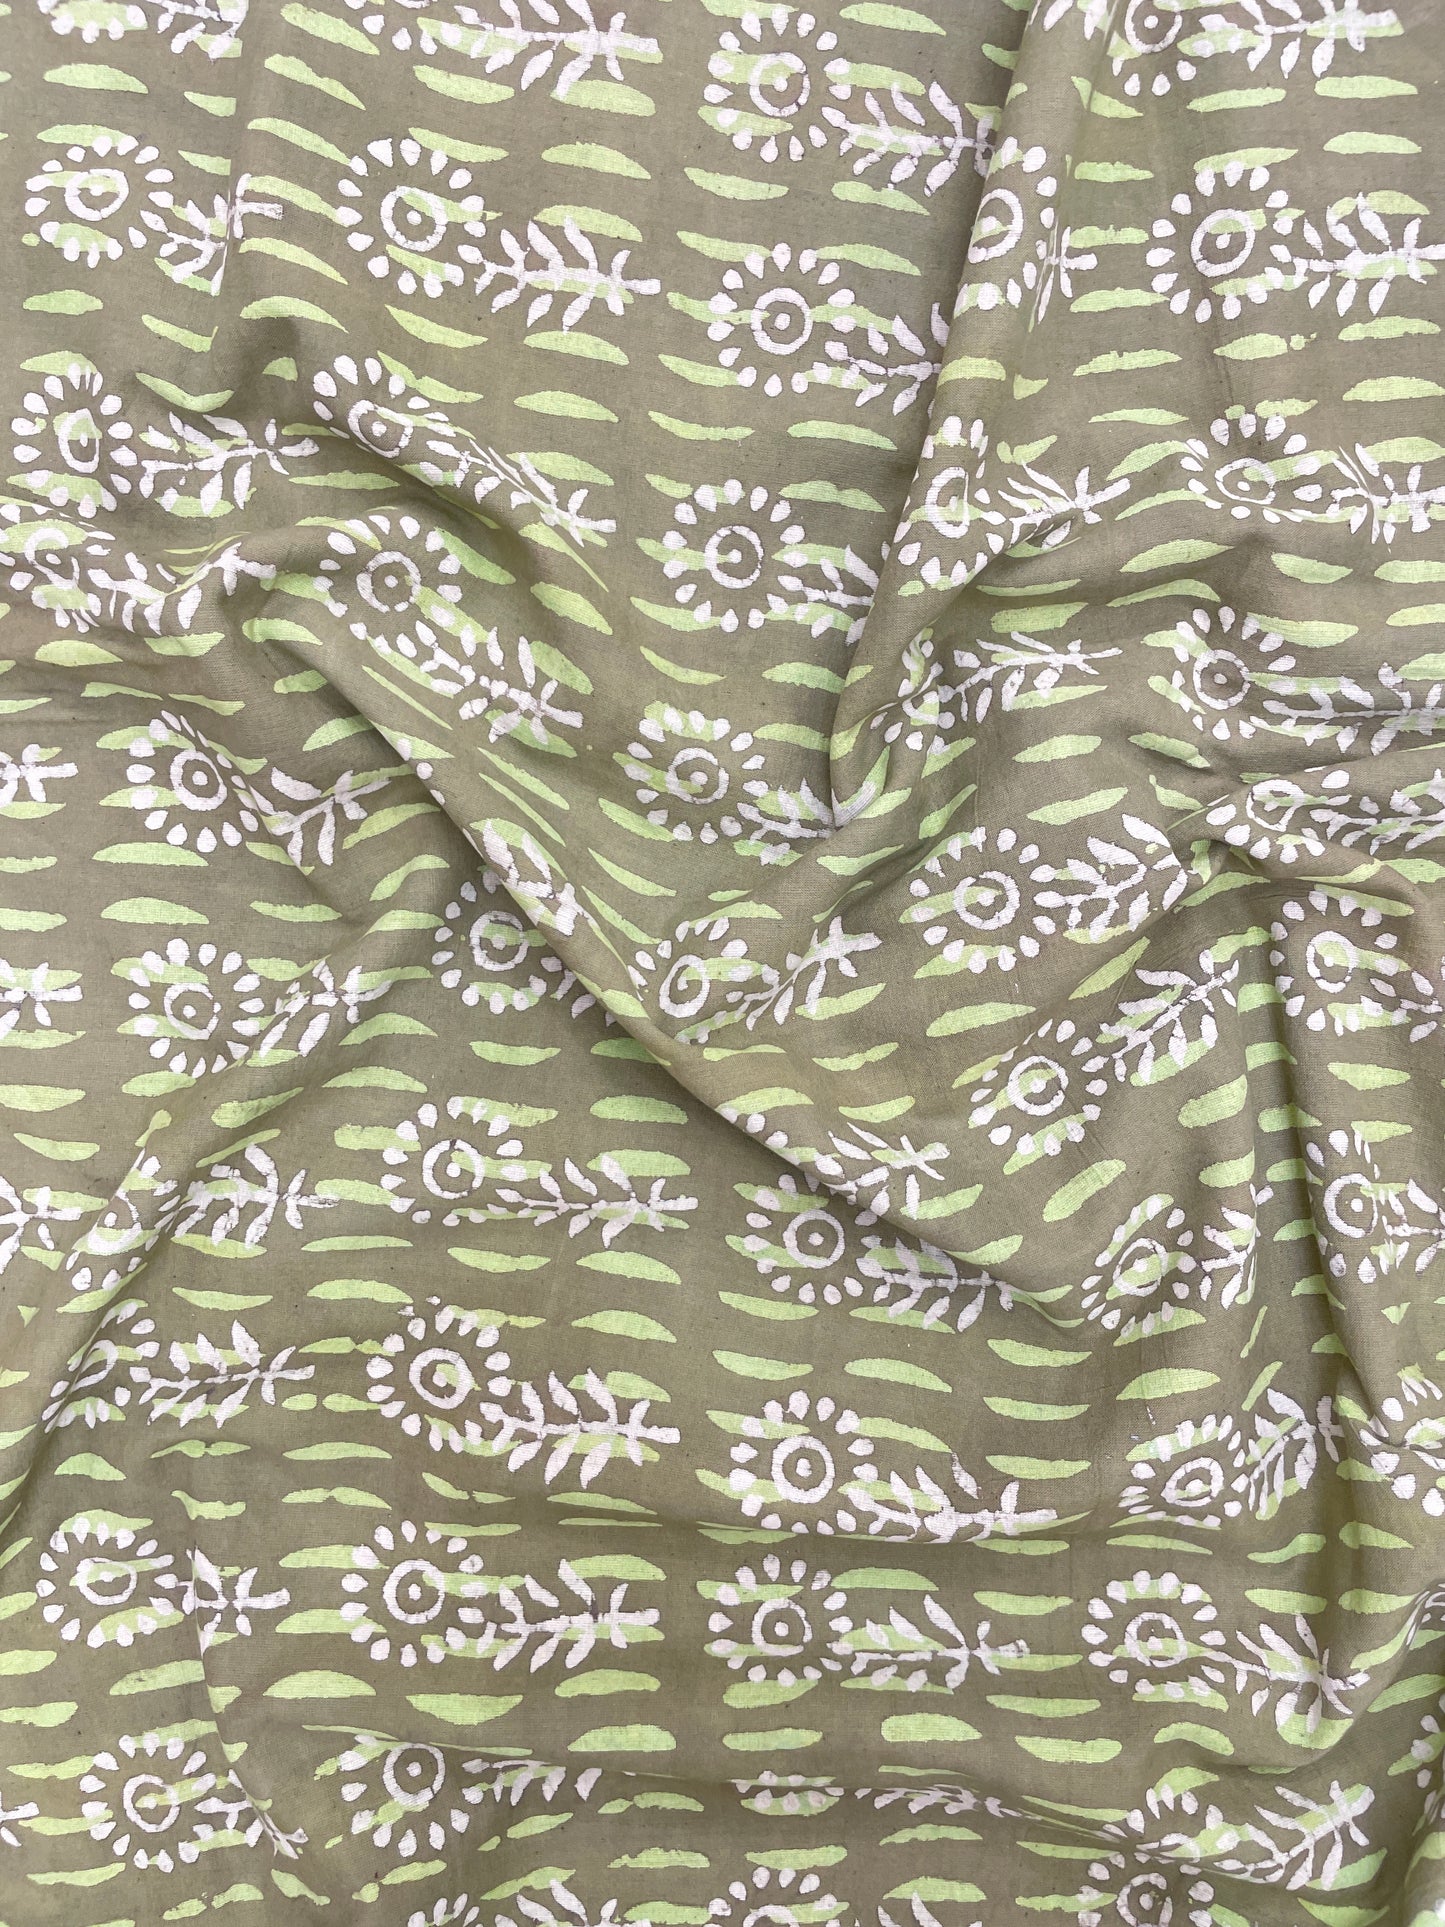 Adorable Attractive Green And White Block Print On Cotton Fabric